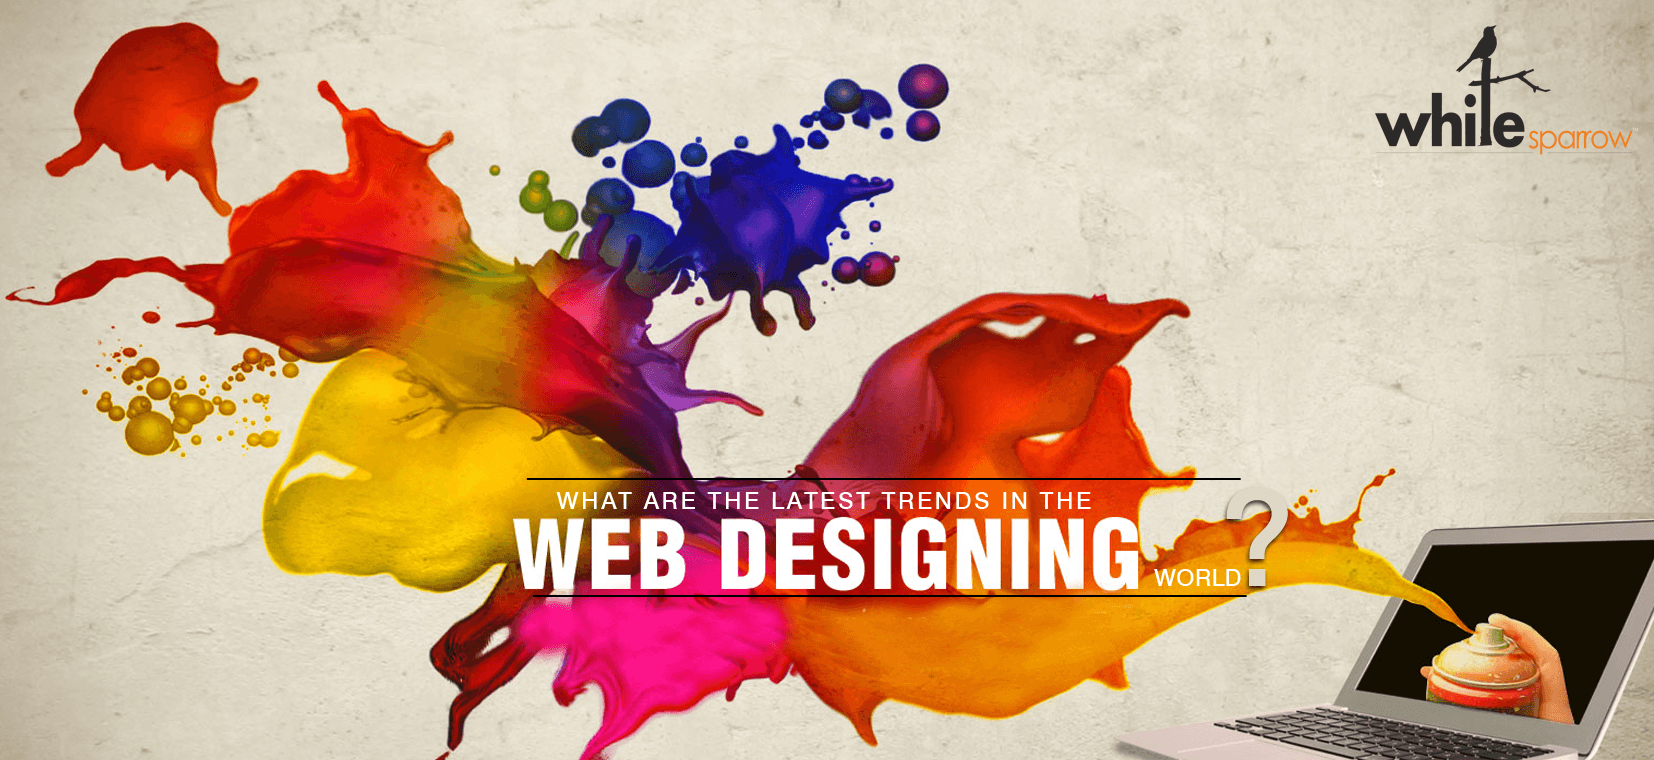 What are the latest trends in the web designing world